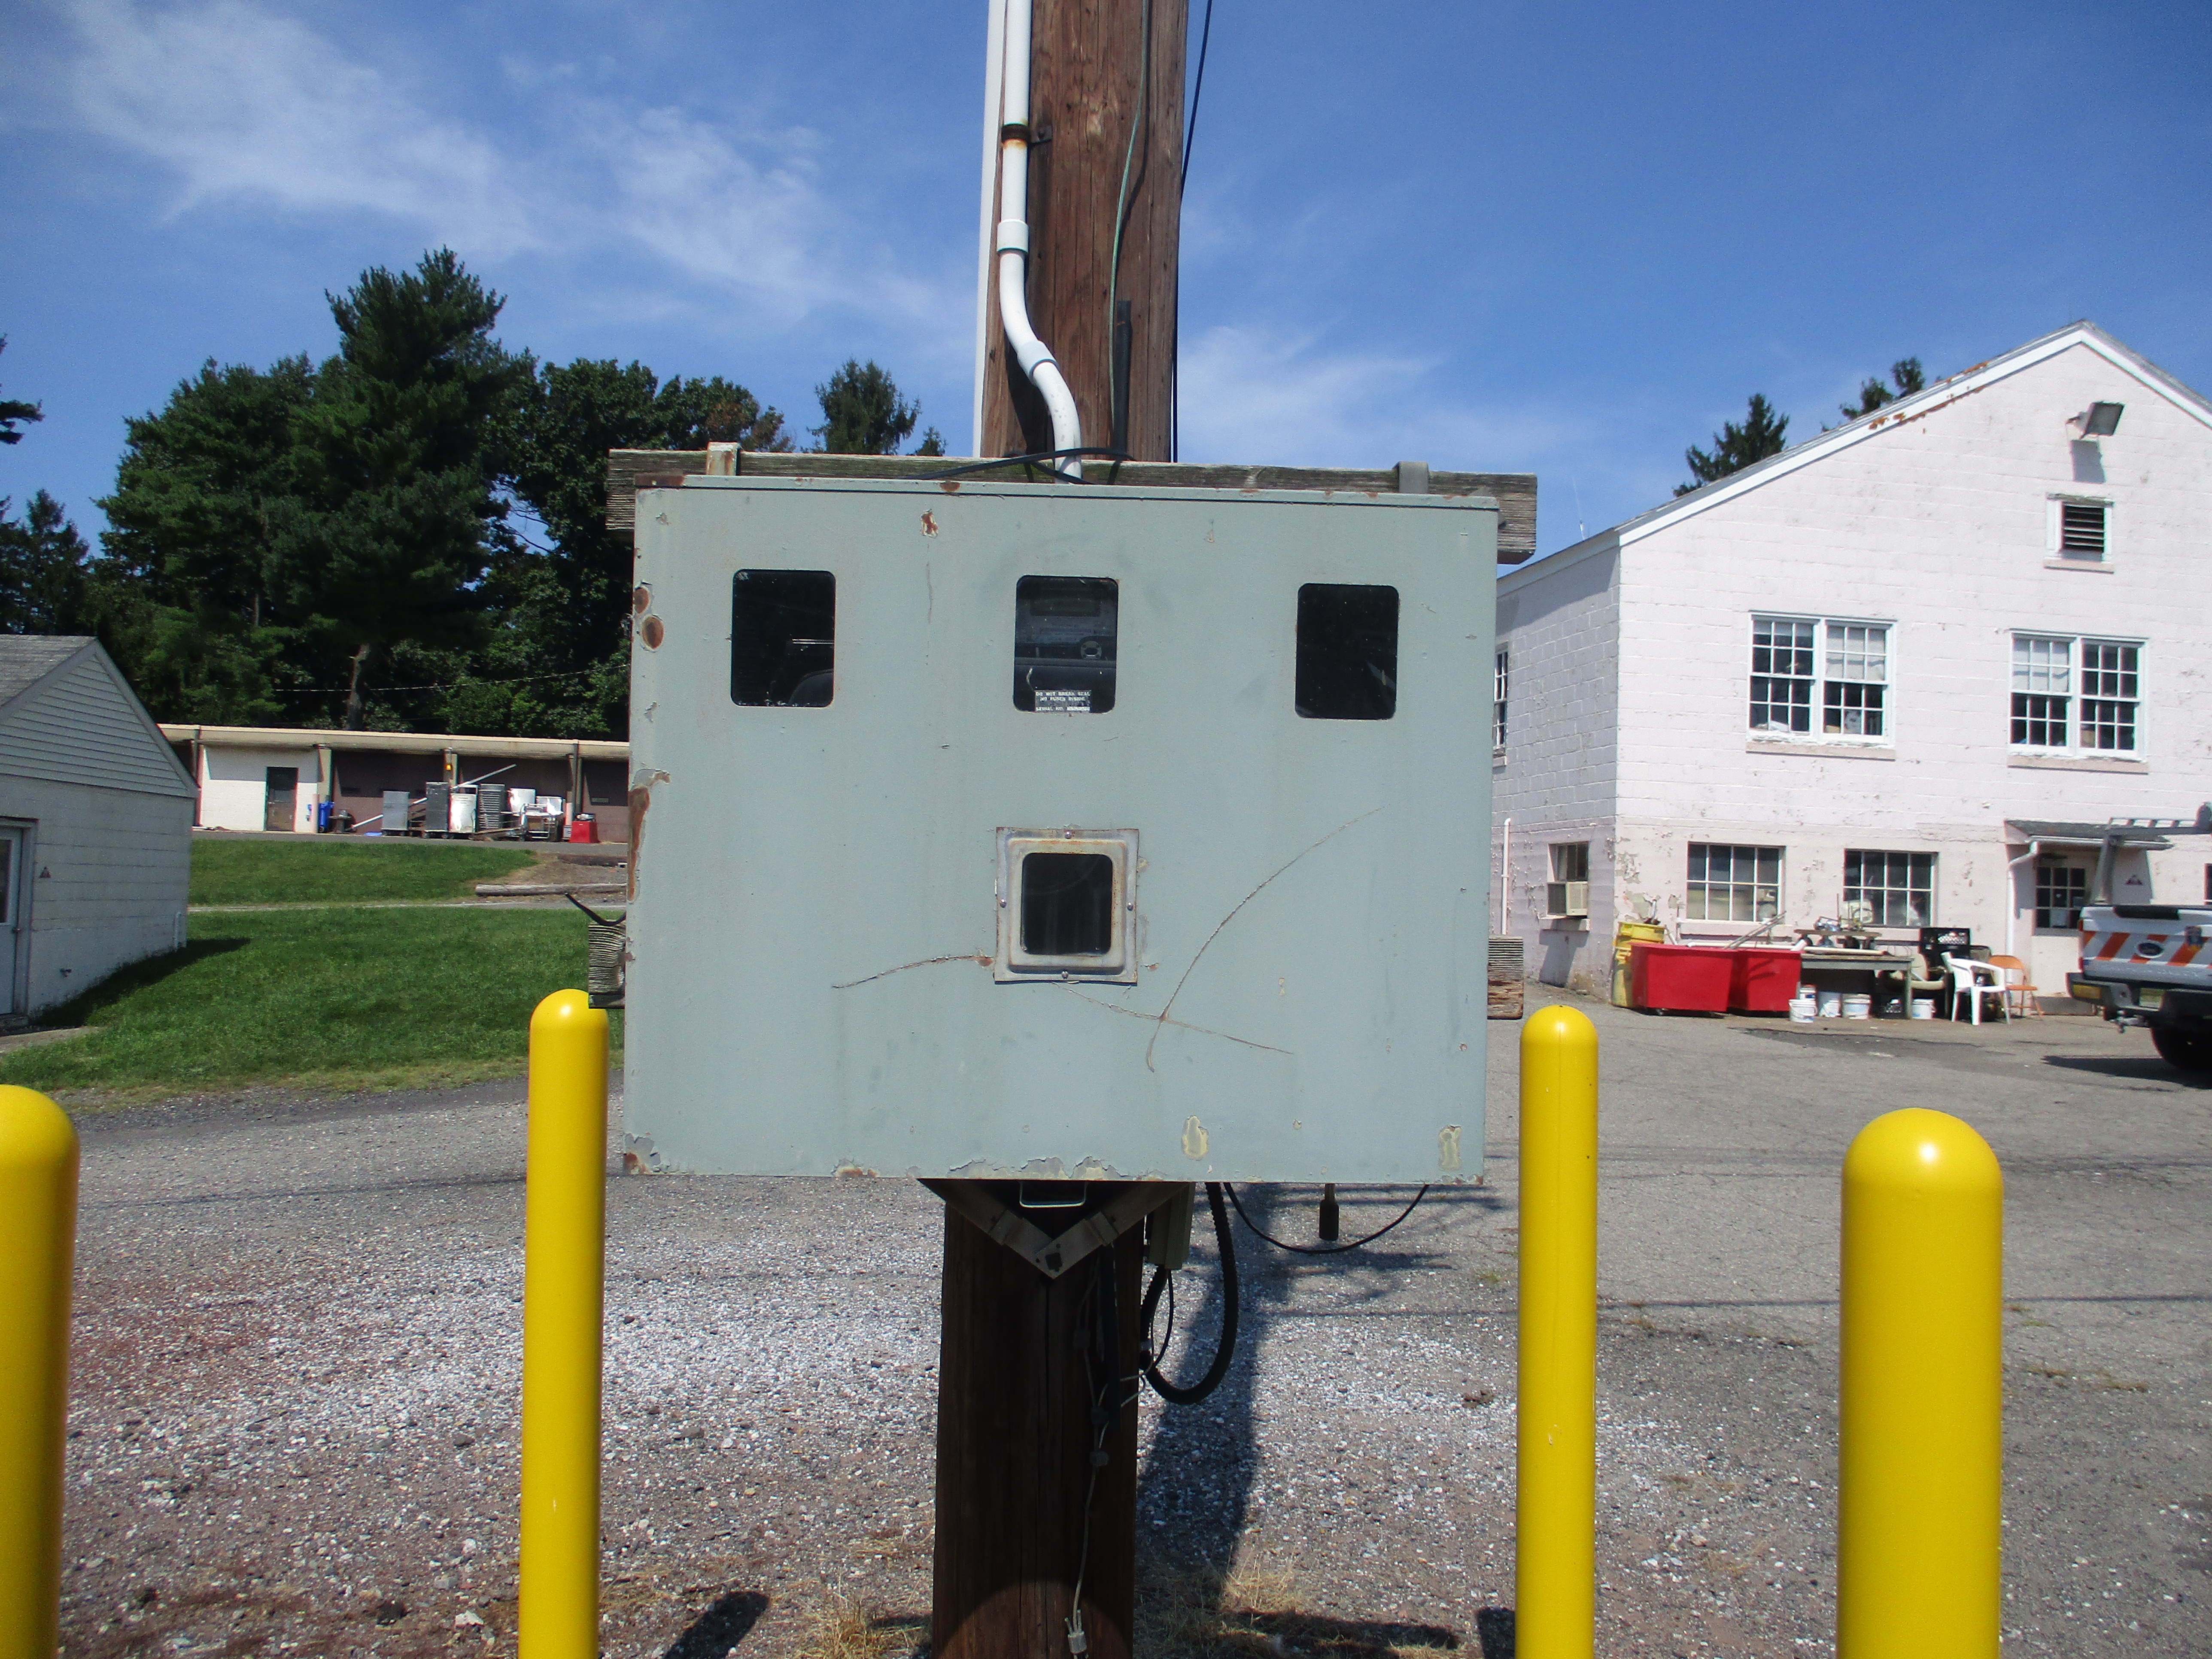 Main electric meter for campus